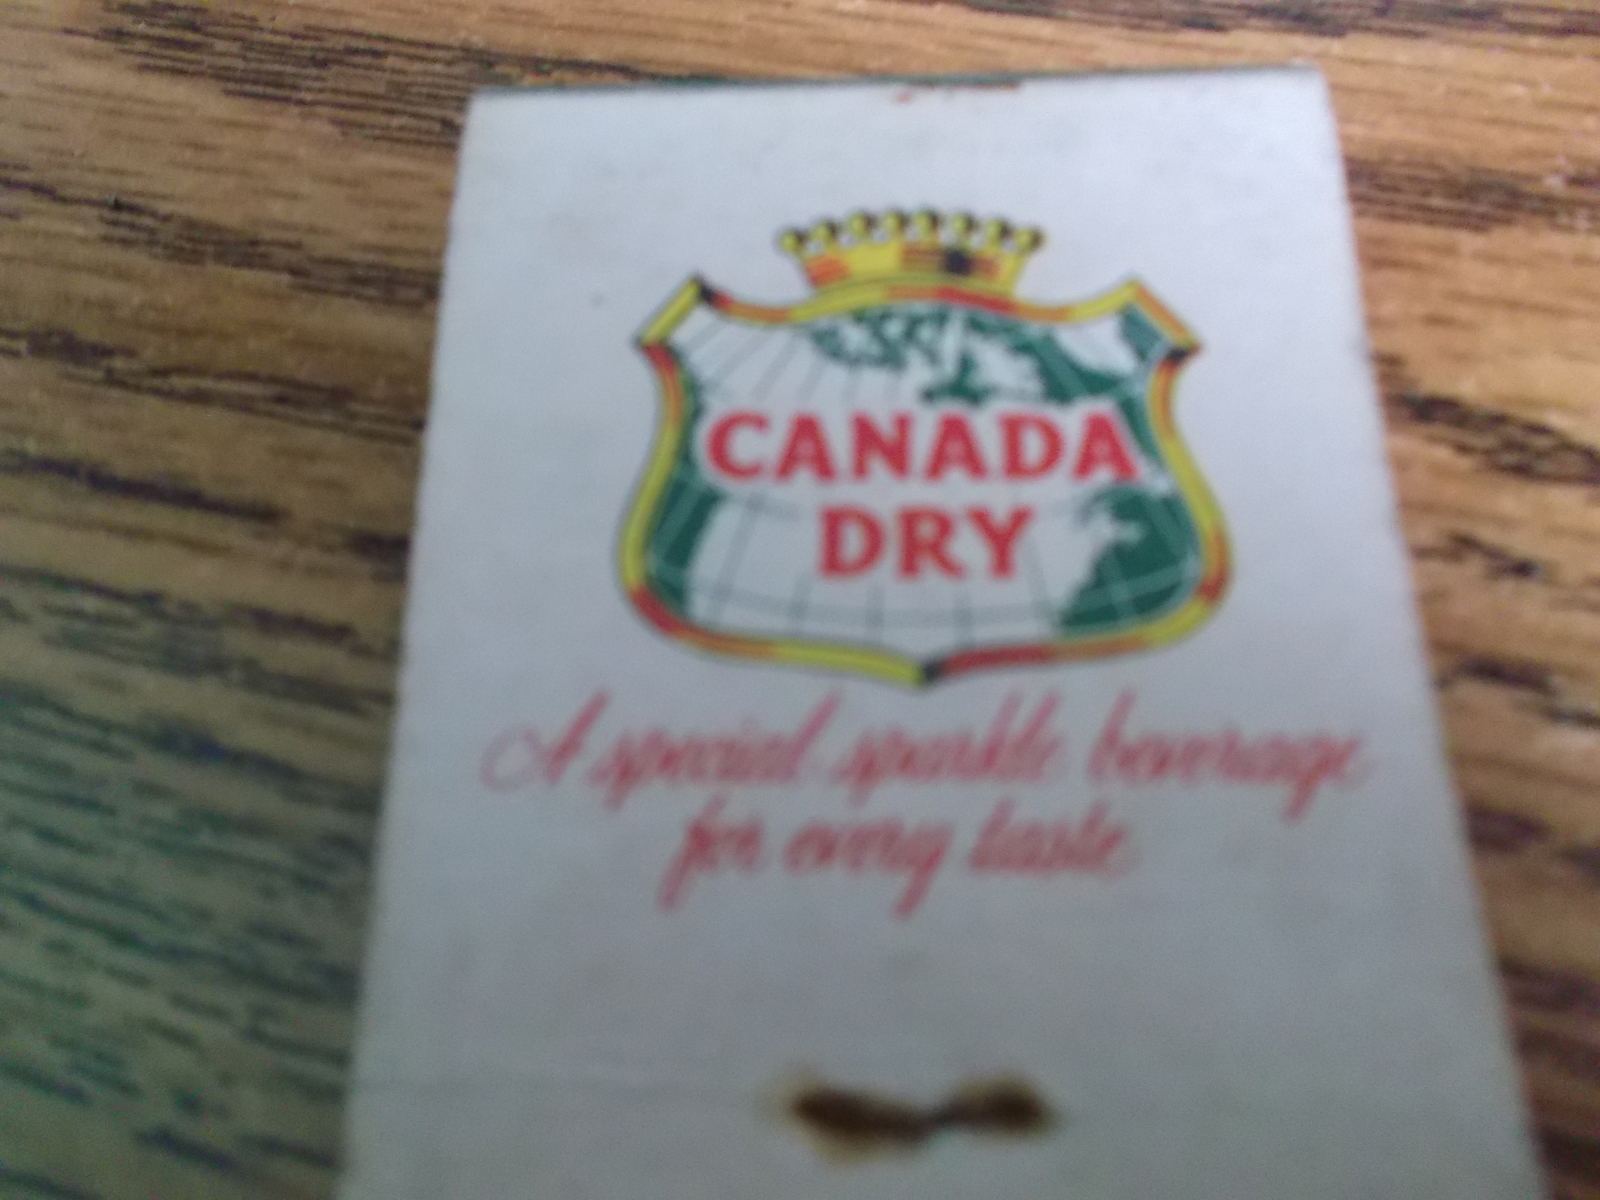 Canada Dry Ginger Ale & Club Solda Mixers Matchbook - $9.00